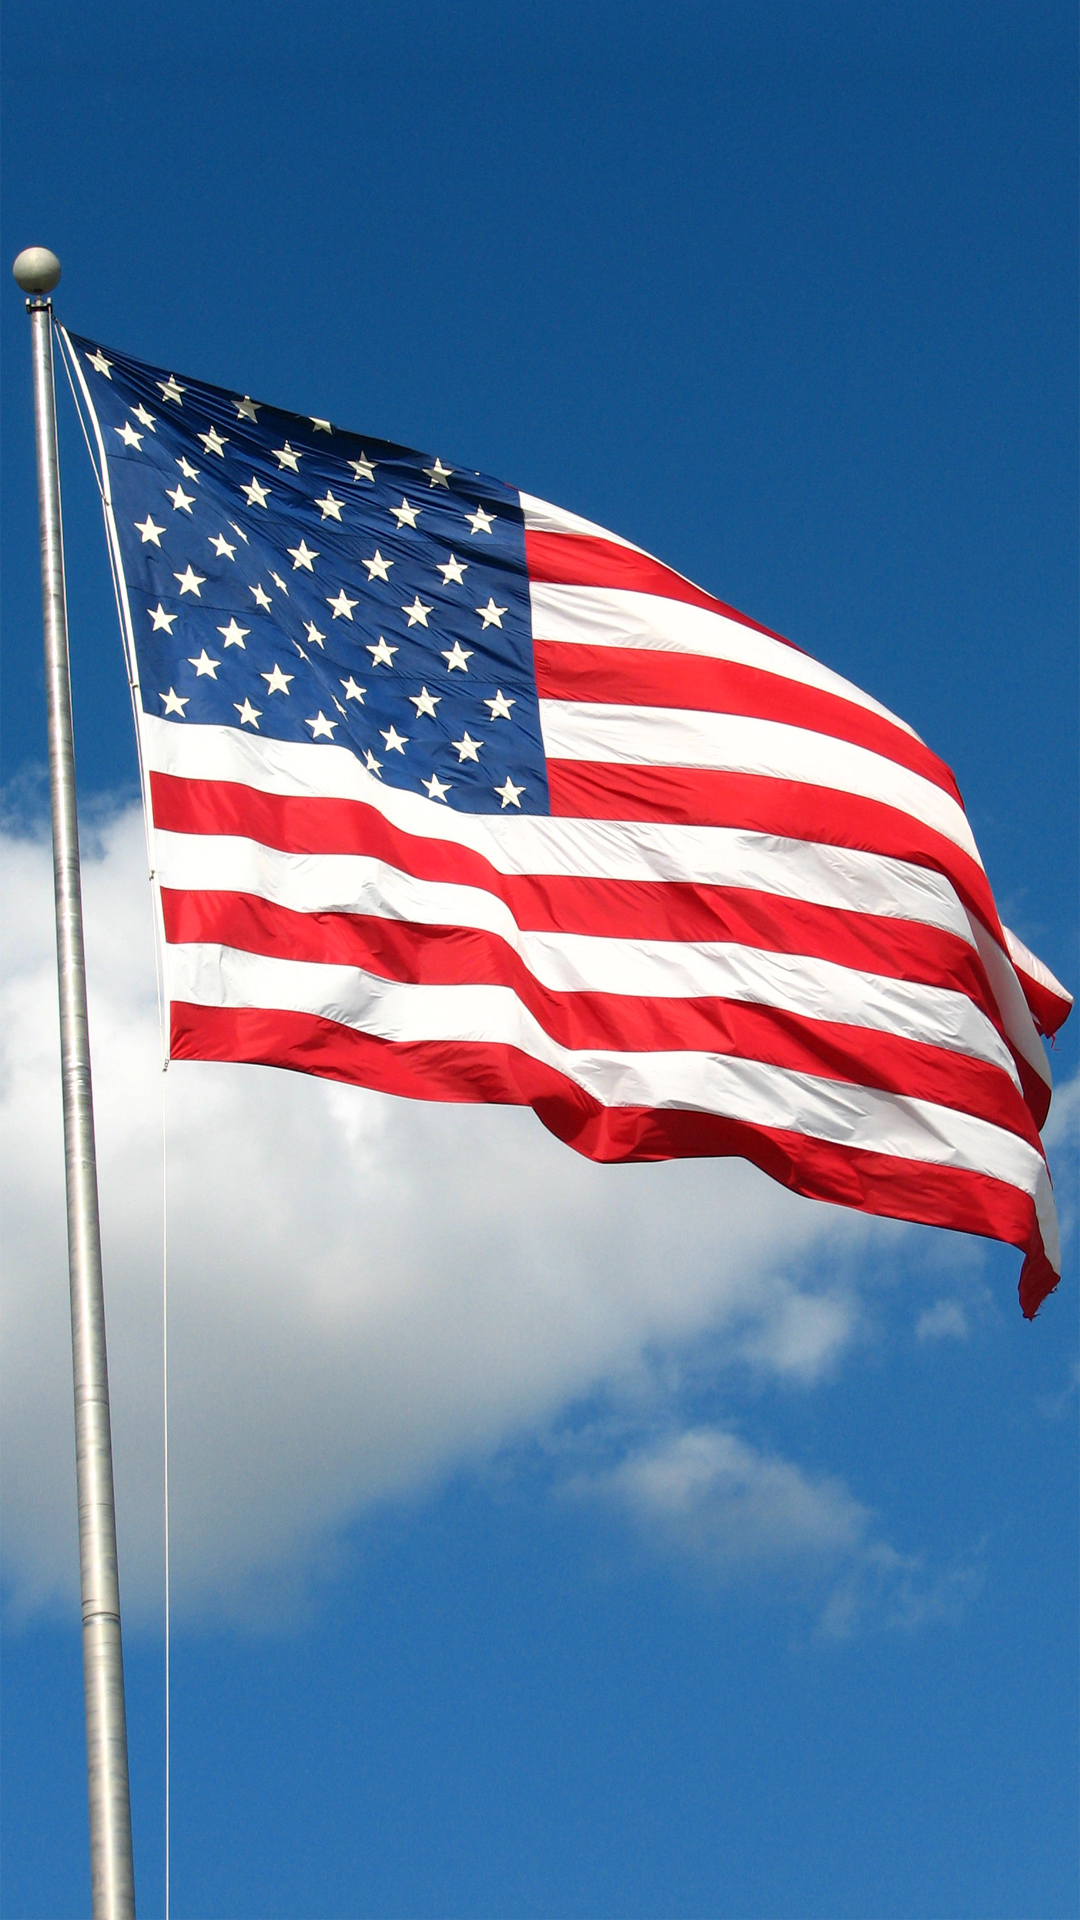 American Flag htc one wallpaper - Best htc one wallpapers, free